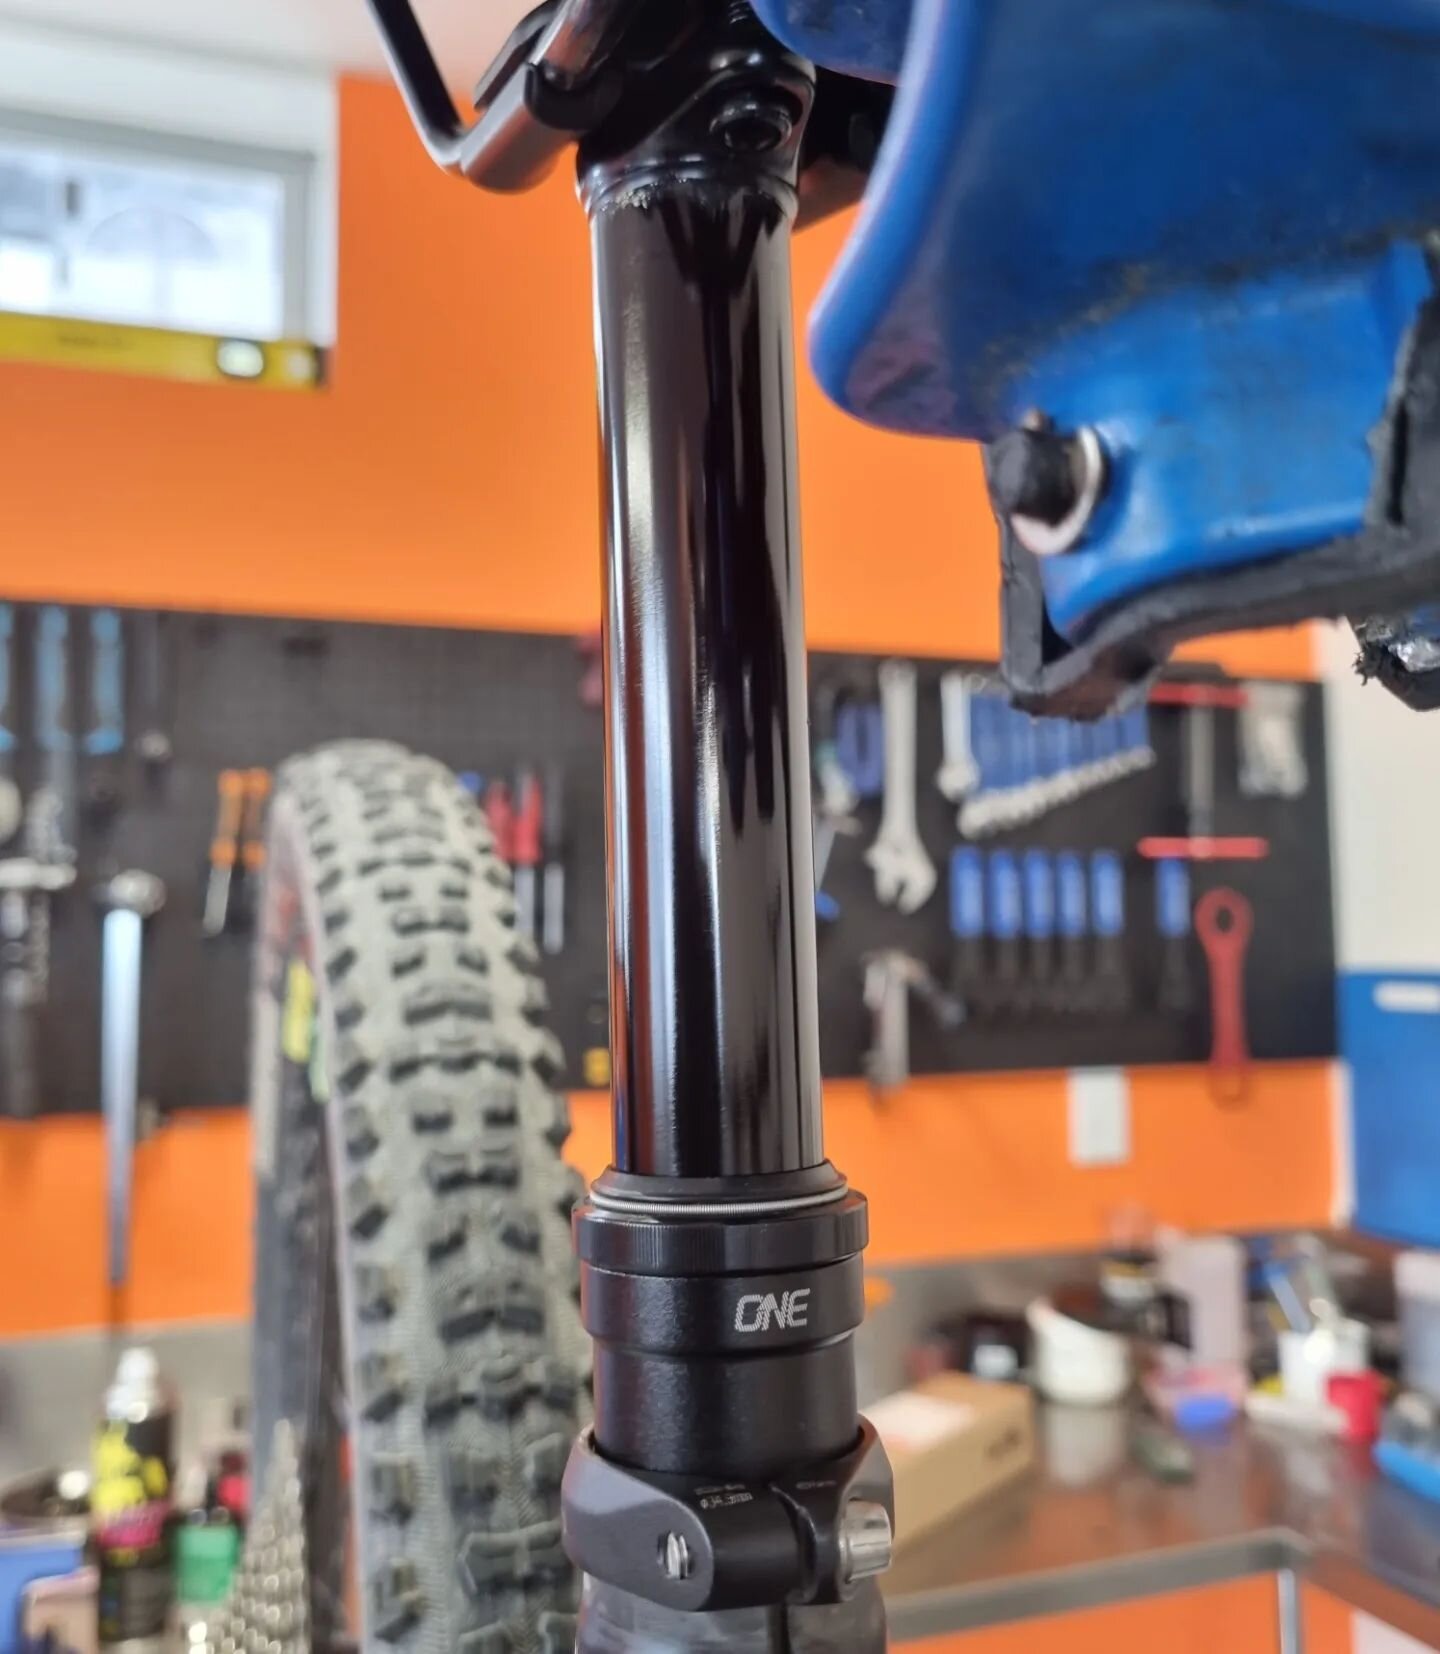 From Drop bars to dropper post 
We do it all at @nomadiccycles.
A few dropper post been fitted this afternoon. #dropperpost
#ksdropper #oneupcomponents #nomadiccycles #125mm #150mm #31.6mm #konabikes #scottbikes #